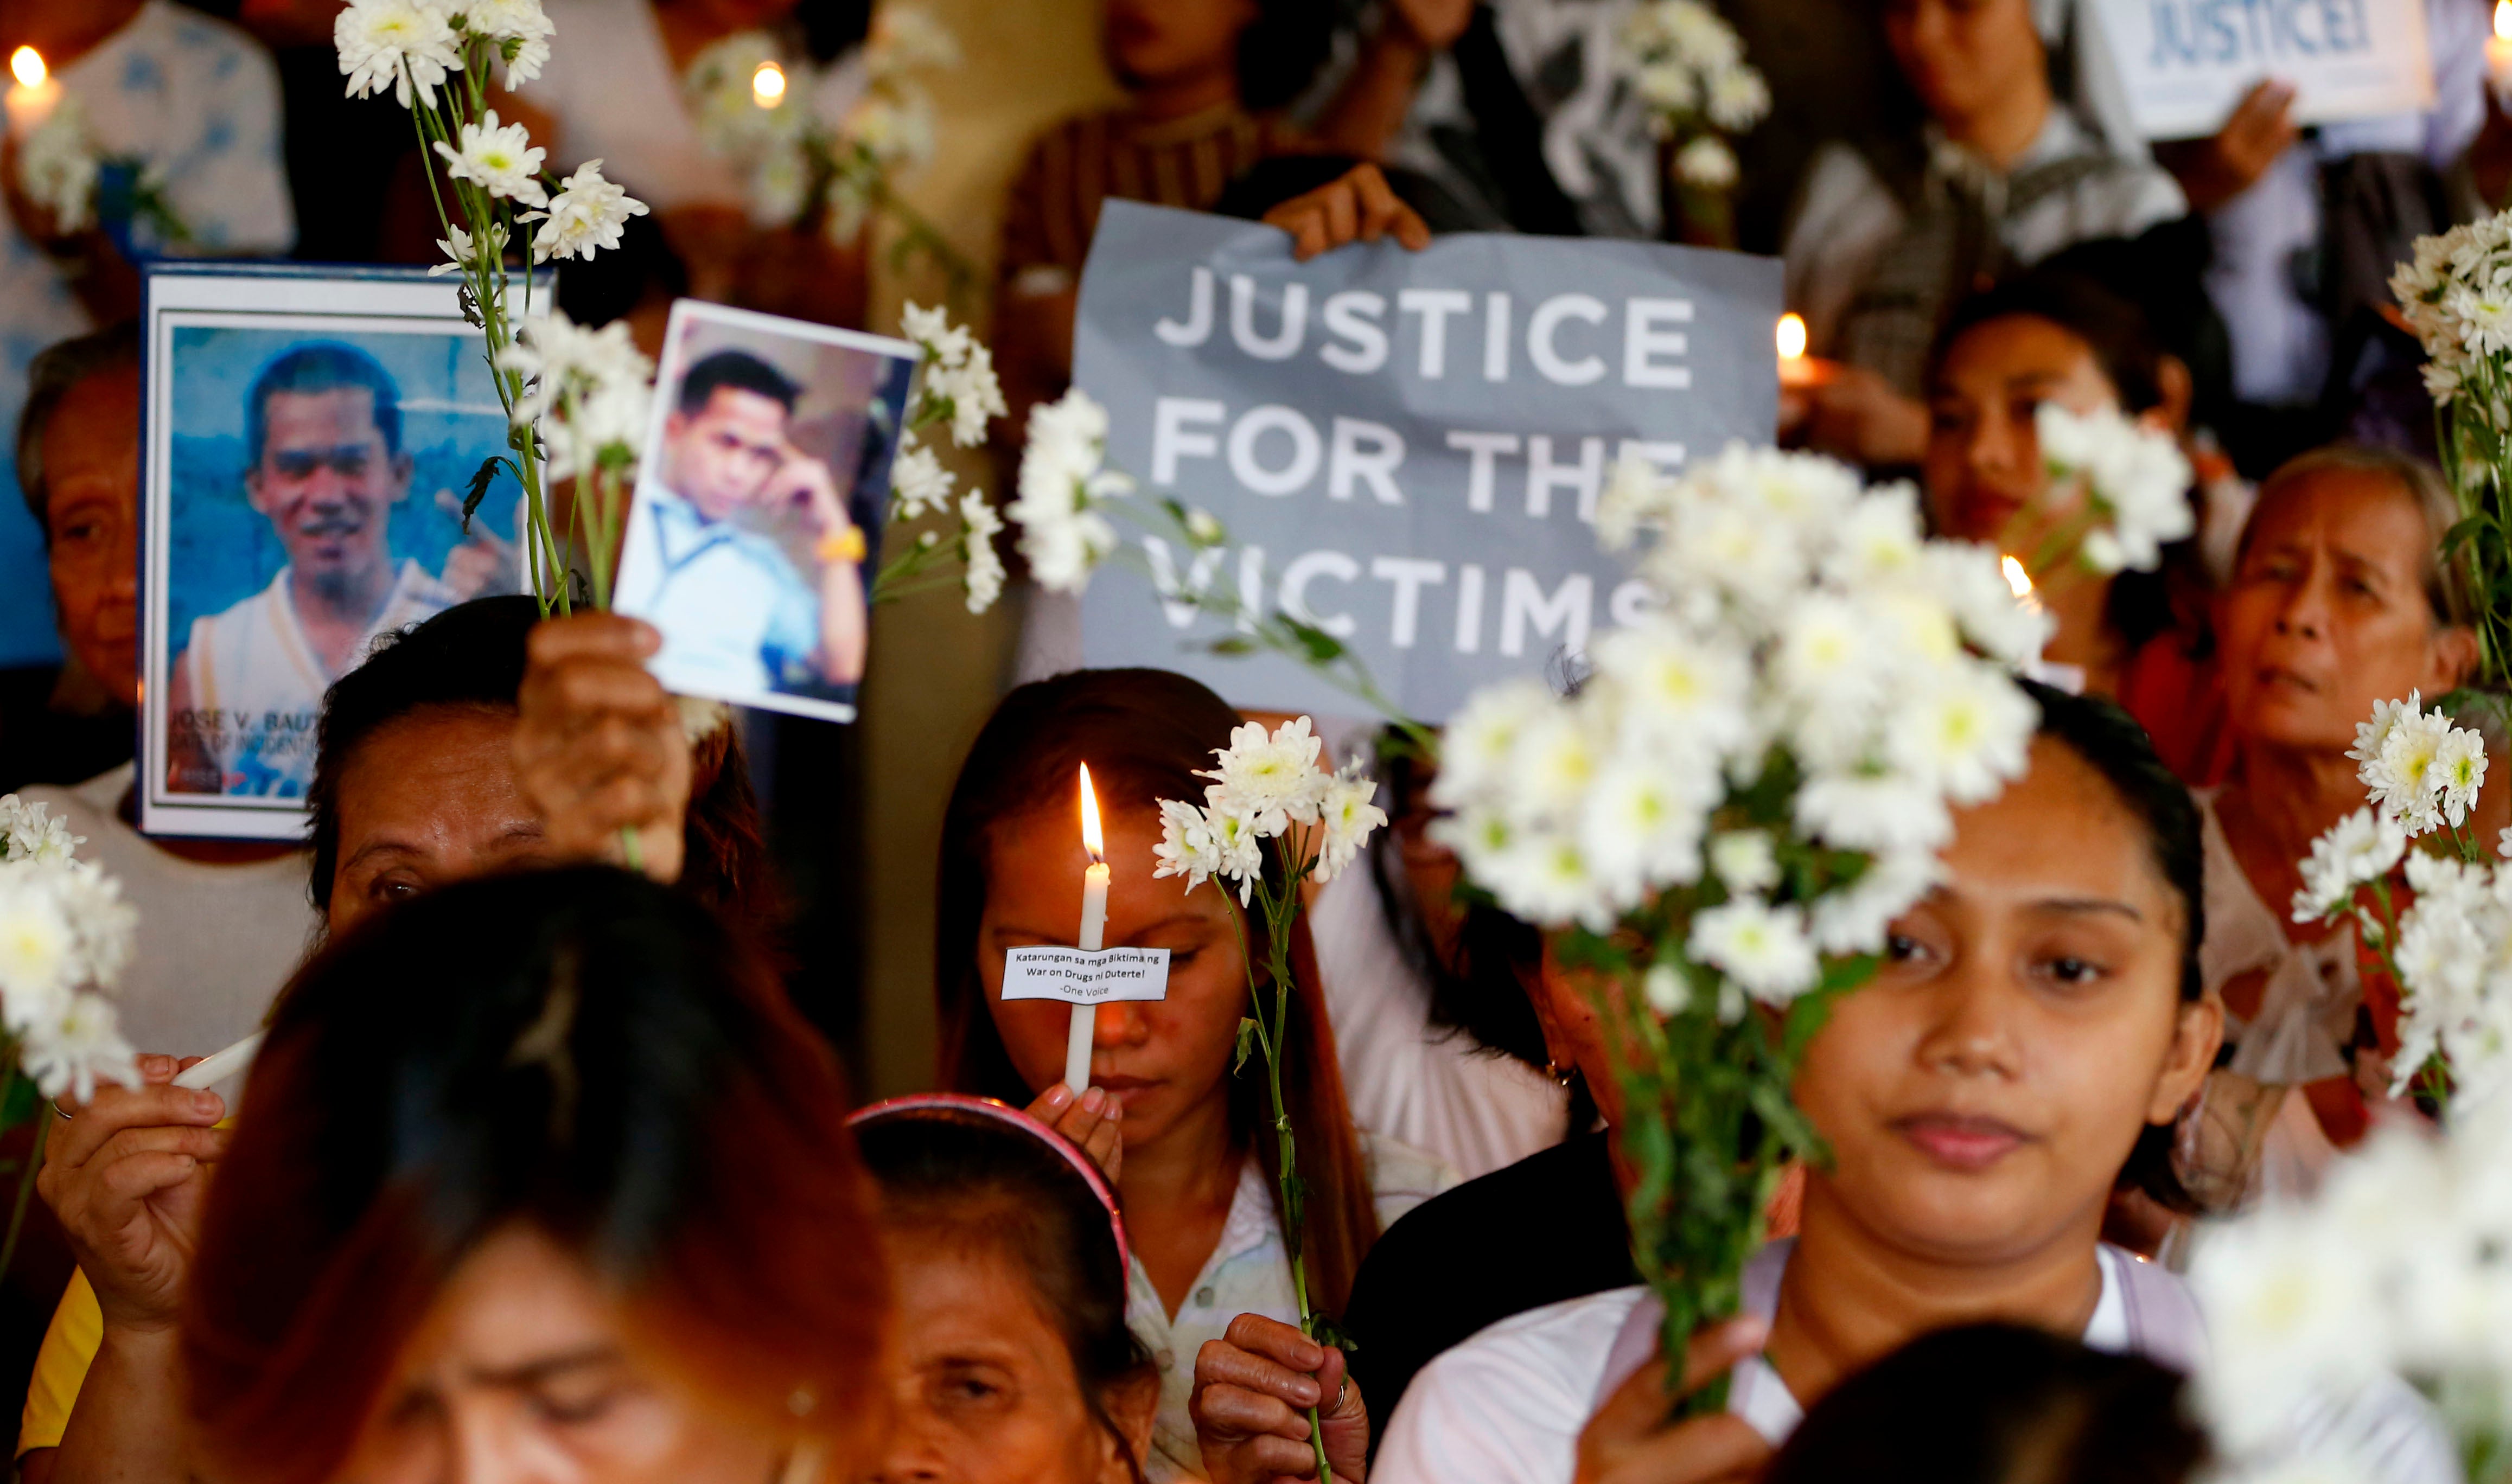 Relatives of victims during President Rodrigo Duterte's “war on drugs” hold a memorial for their loved ones at a church in Manila.